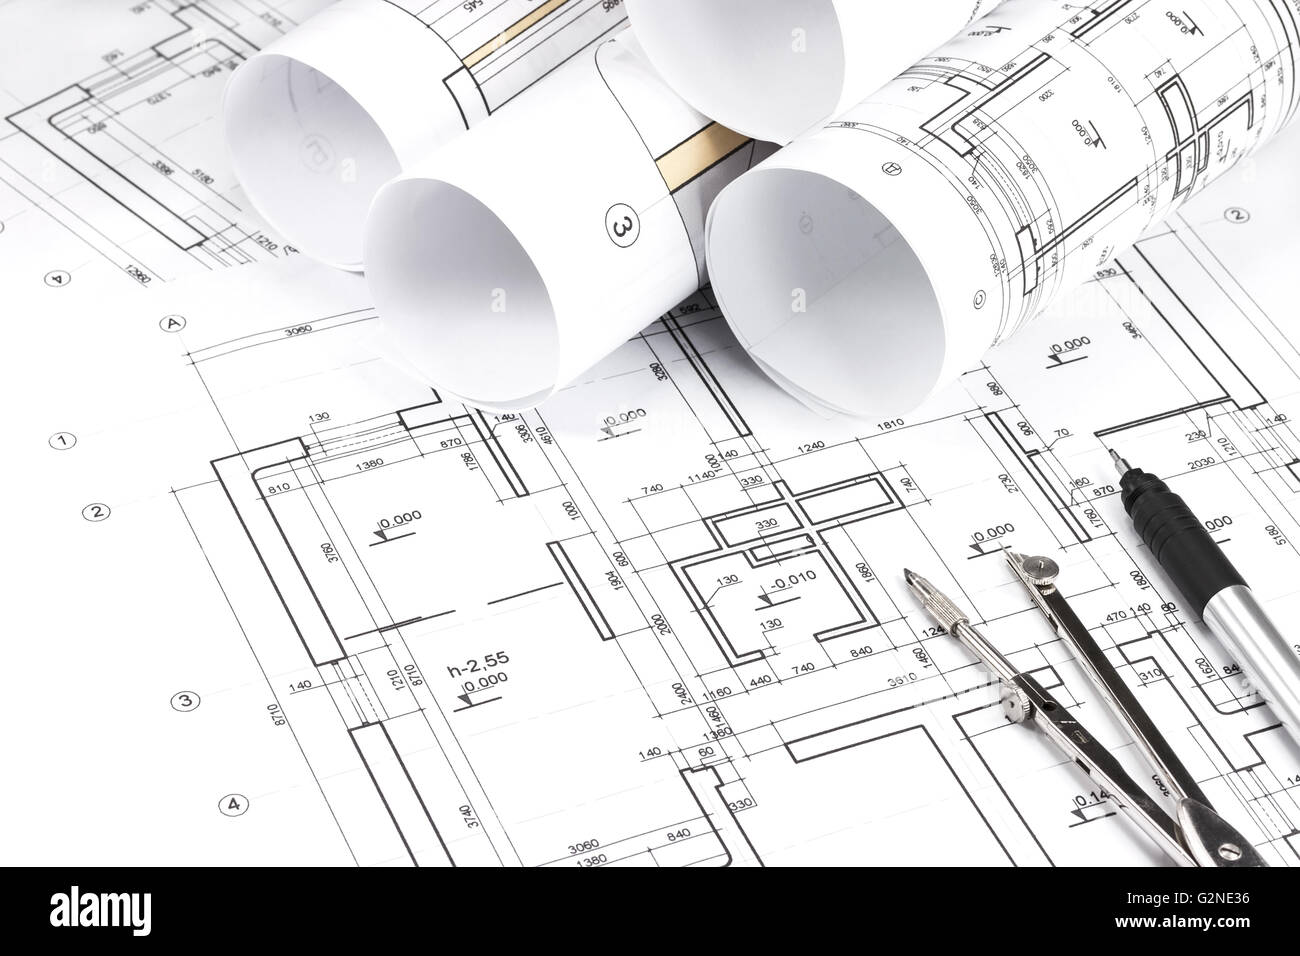 Architectural background with rolls of technical drawings and work tools  Stock Photo - Alamy